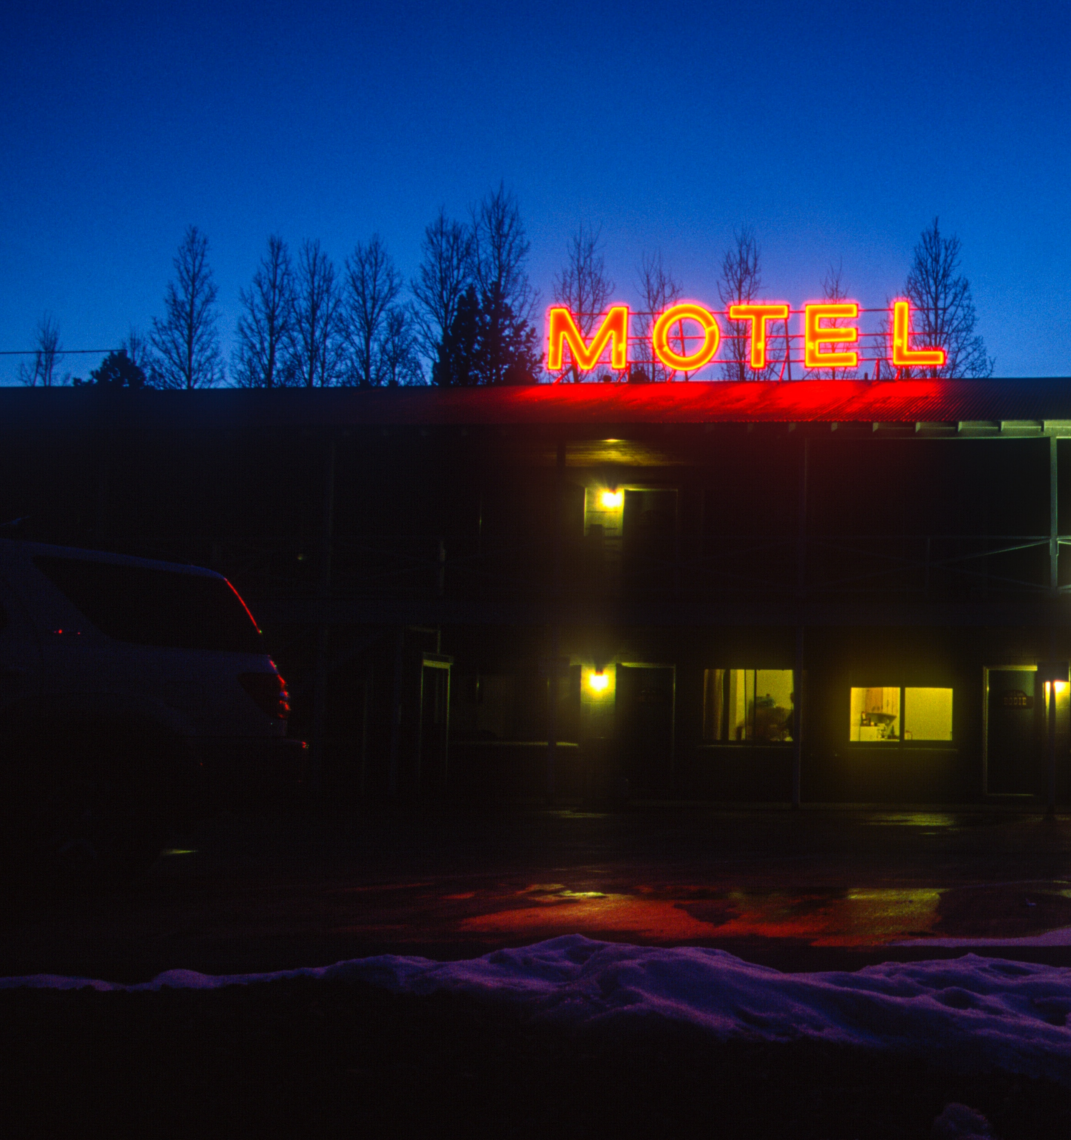 A neon red "MOTEL" sign glows against a deep blue twilight sky. Below, a dimly lit building shows a warmly lit interior through its windows. A white vehicle is parked outside on a wet, reflective surface with patches of snow nearby, capturing the essence of Berkeley Journalism's evocative storytelling.